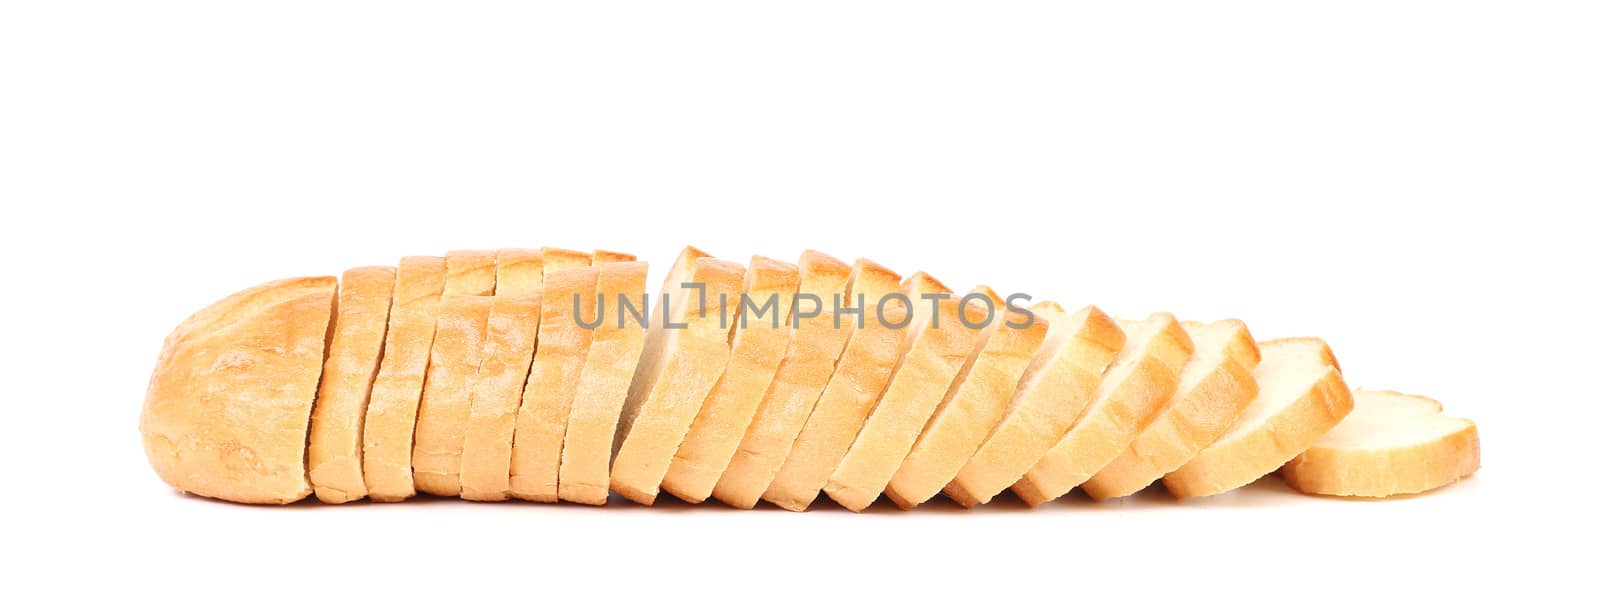 Sliced white loaf of bread. Isolated on a white background.